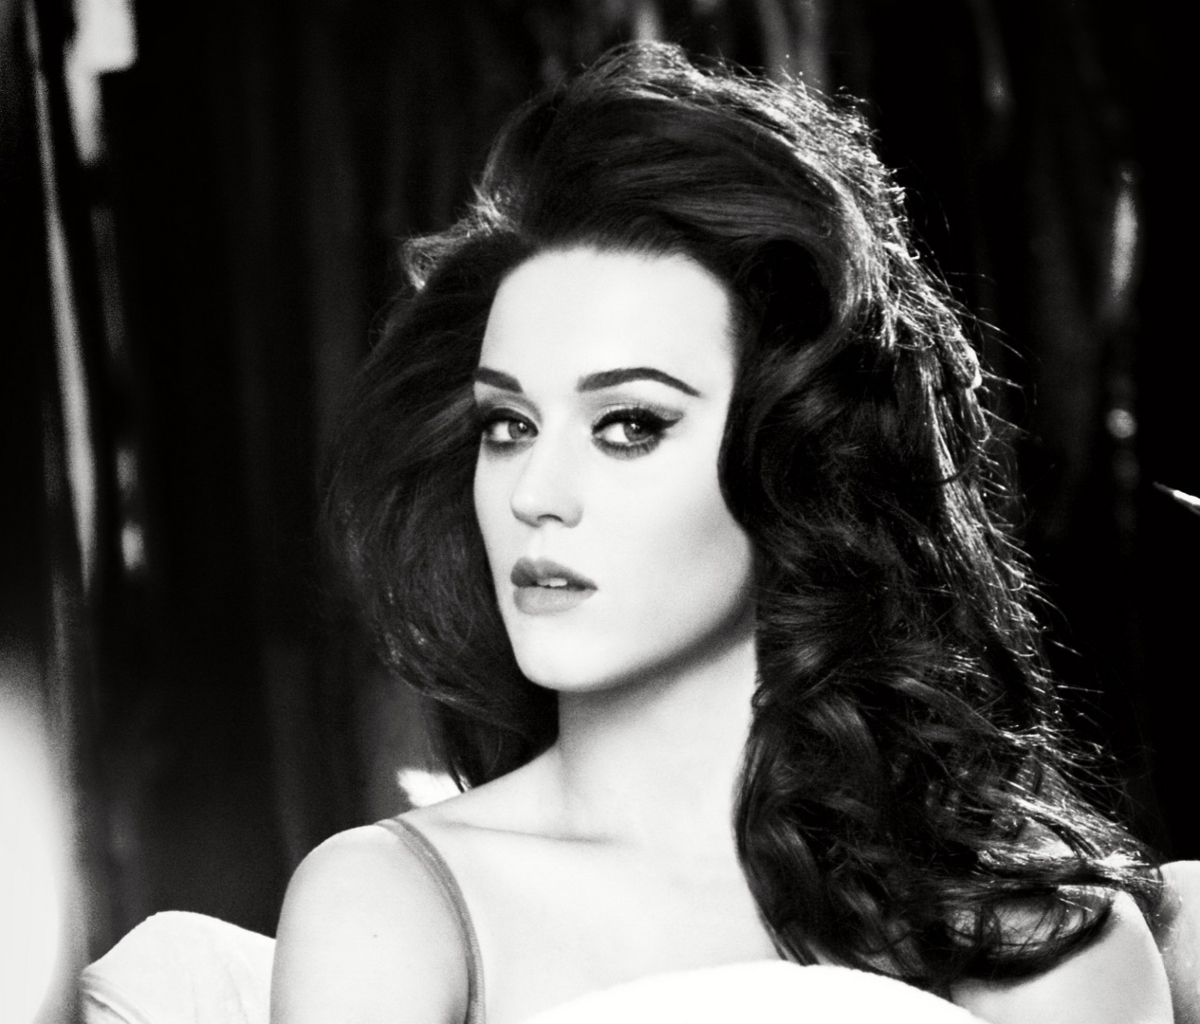 Katy Perry Black And White wallpaper 1200x1024